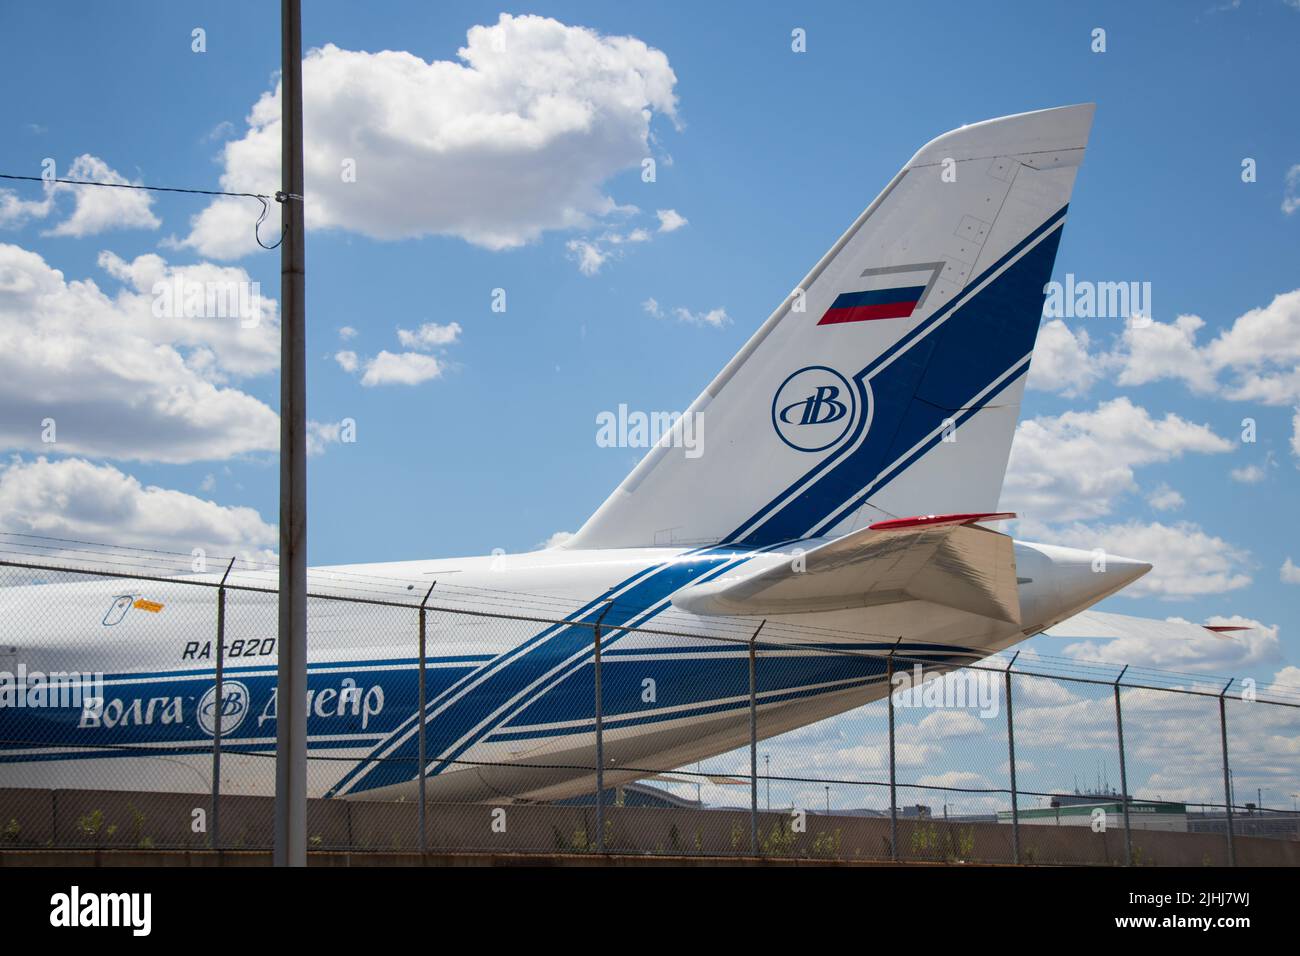 The tail of a grounded Russian-registered, Antonov 124 cargo plane, owned by Volga-Dnepr, is seen in Toronto during the Russian invasion of Ukraine. Stock Photo